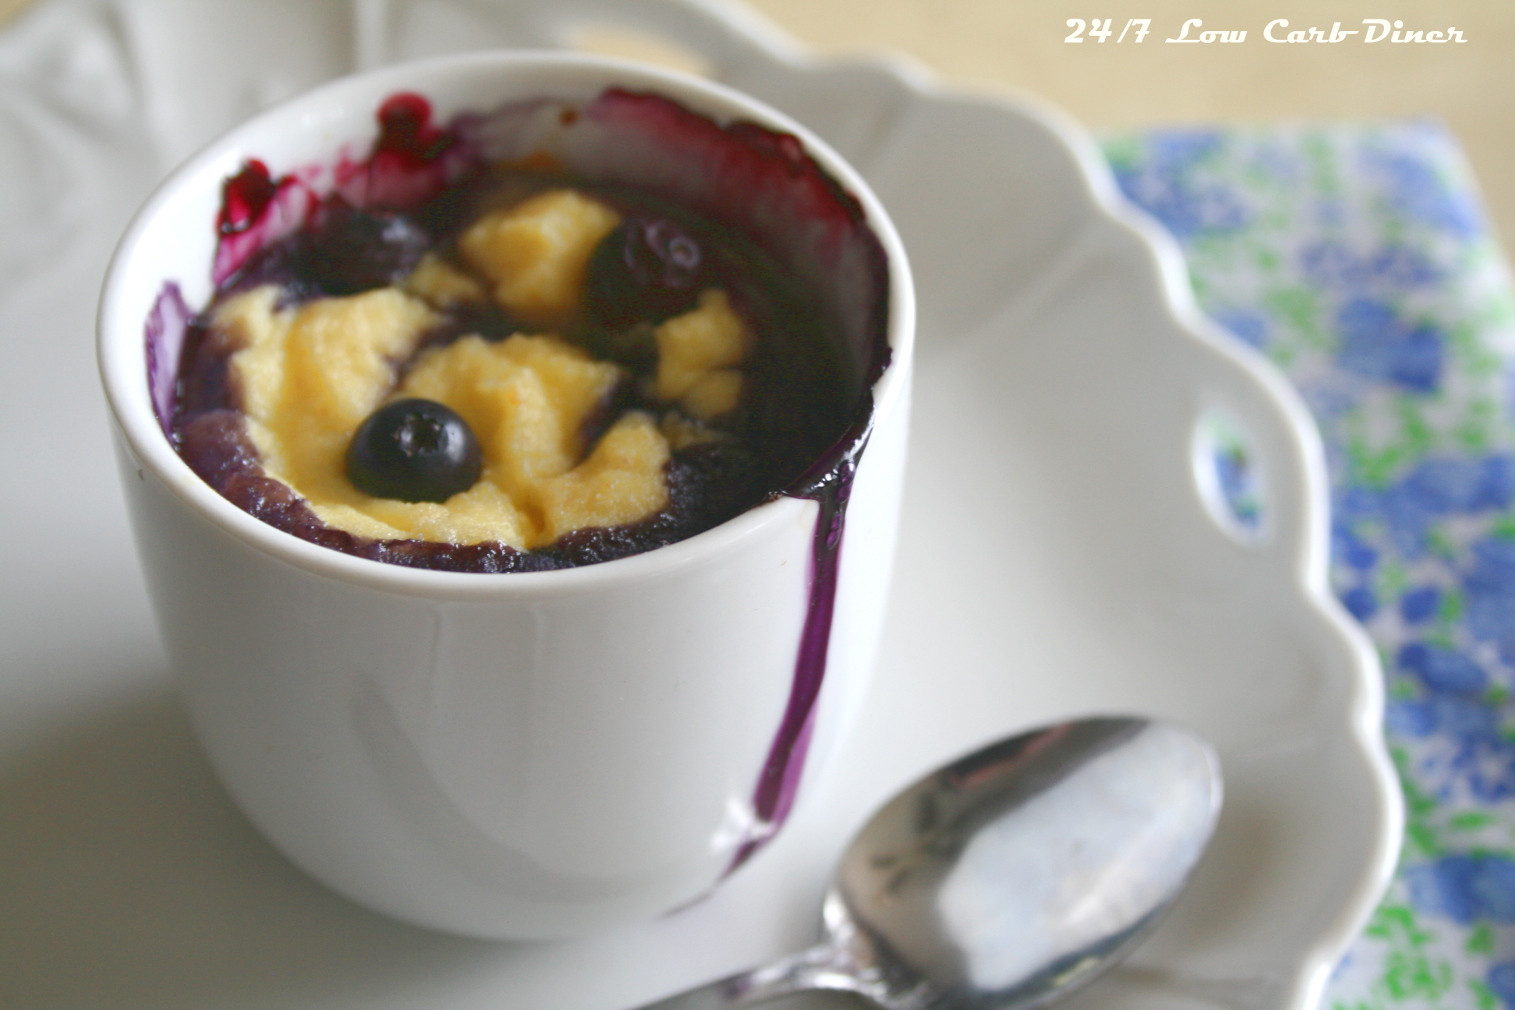 Low Carb Ricotta Cheese Dessert
 24 7 Low Carb Diner Lemon Blueberry Ricotta Cups